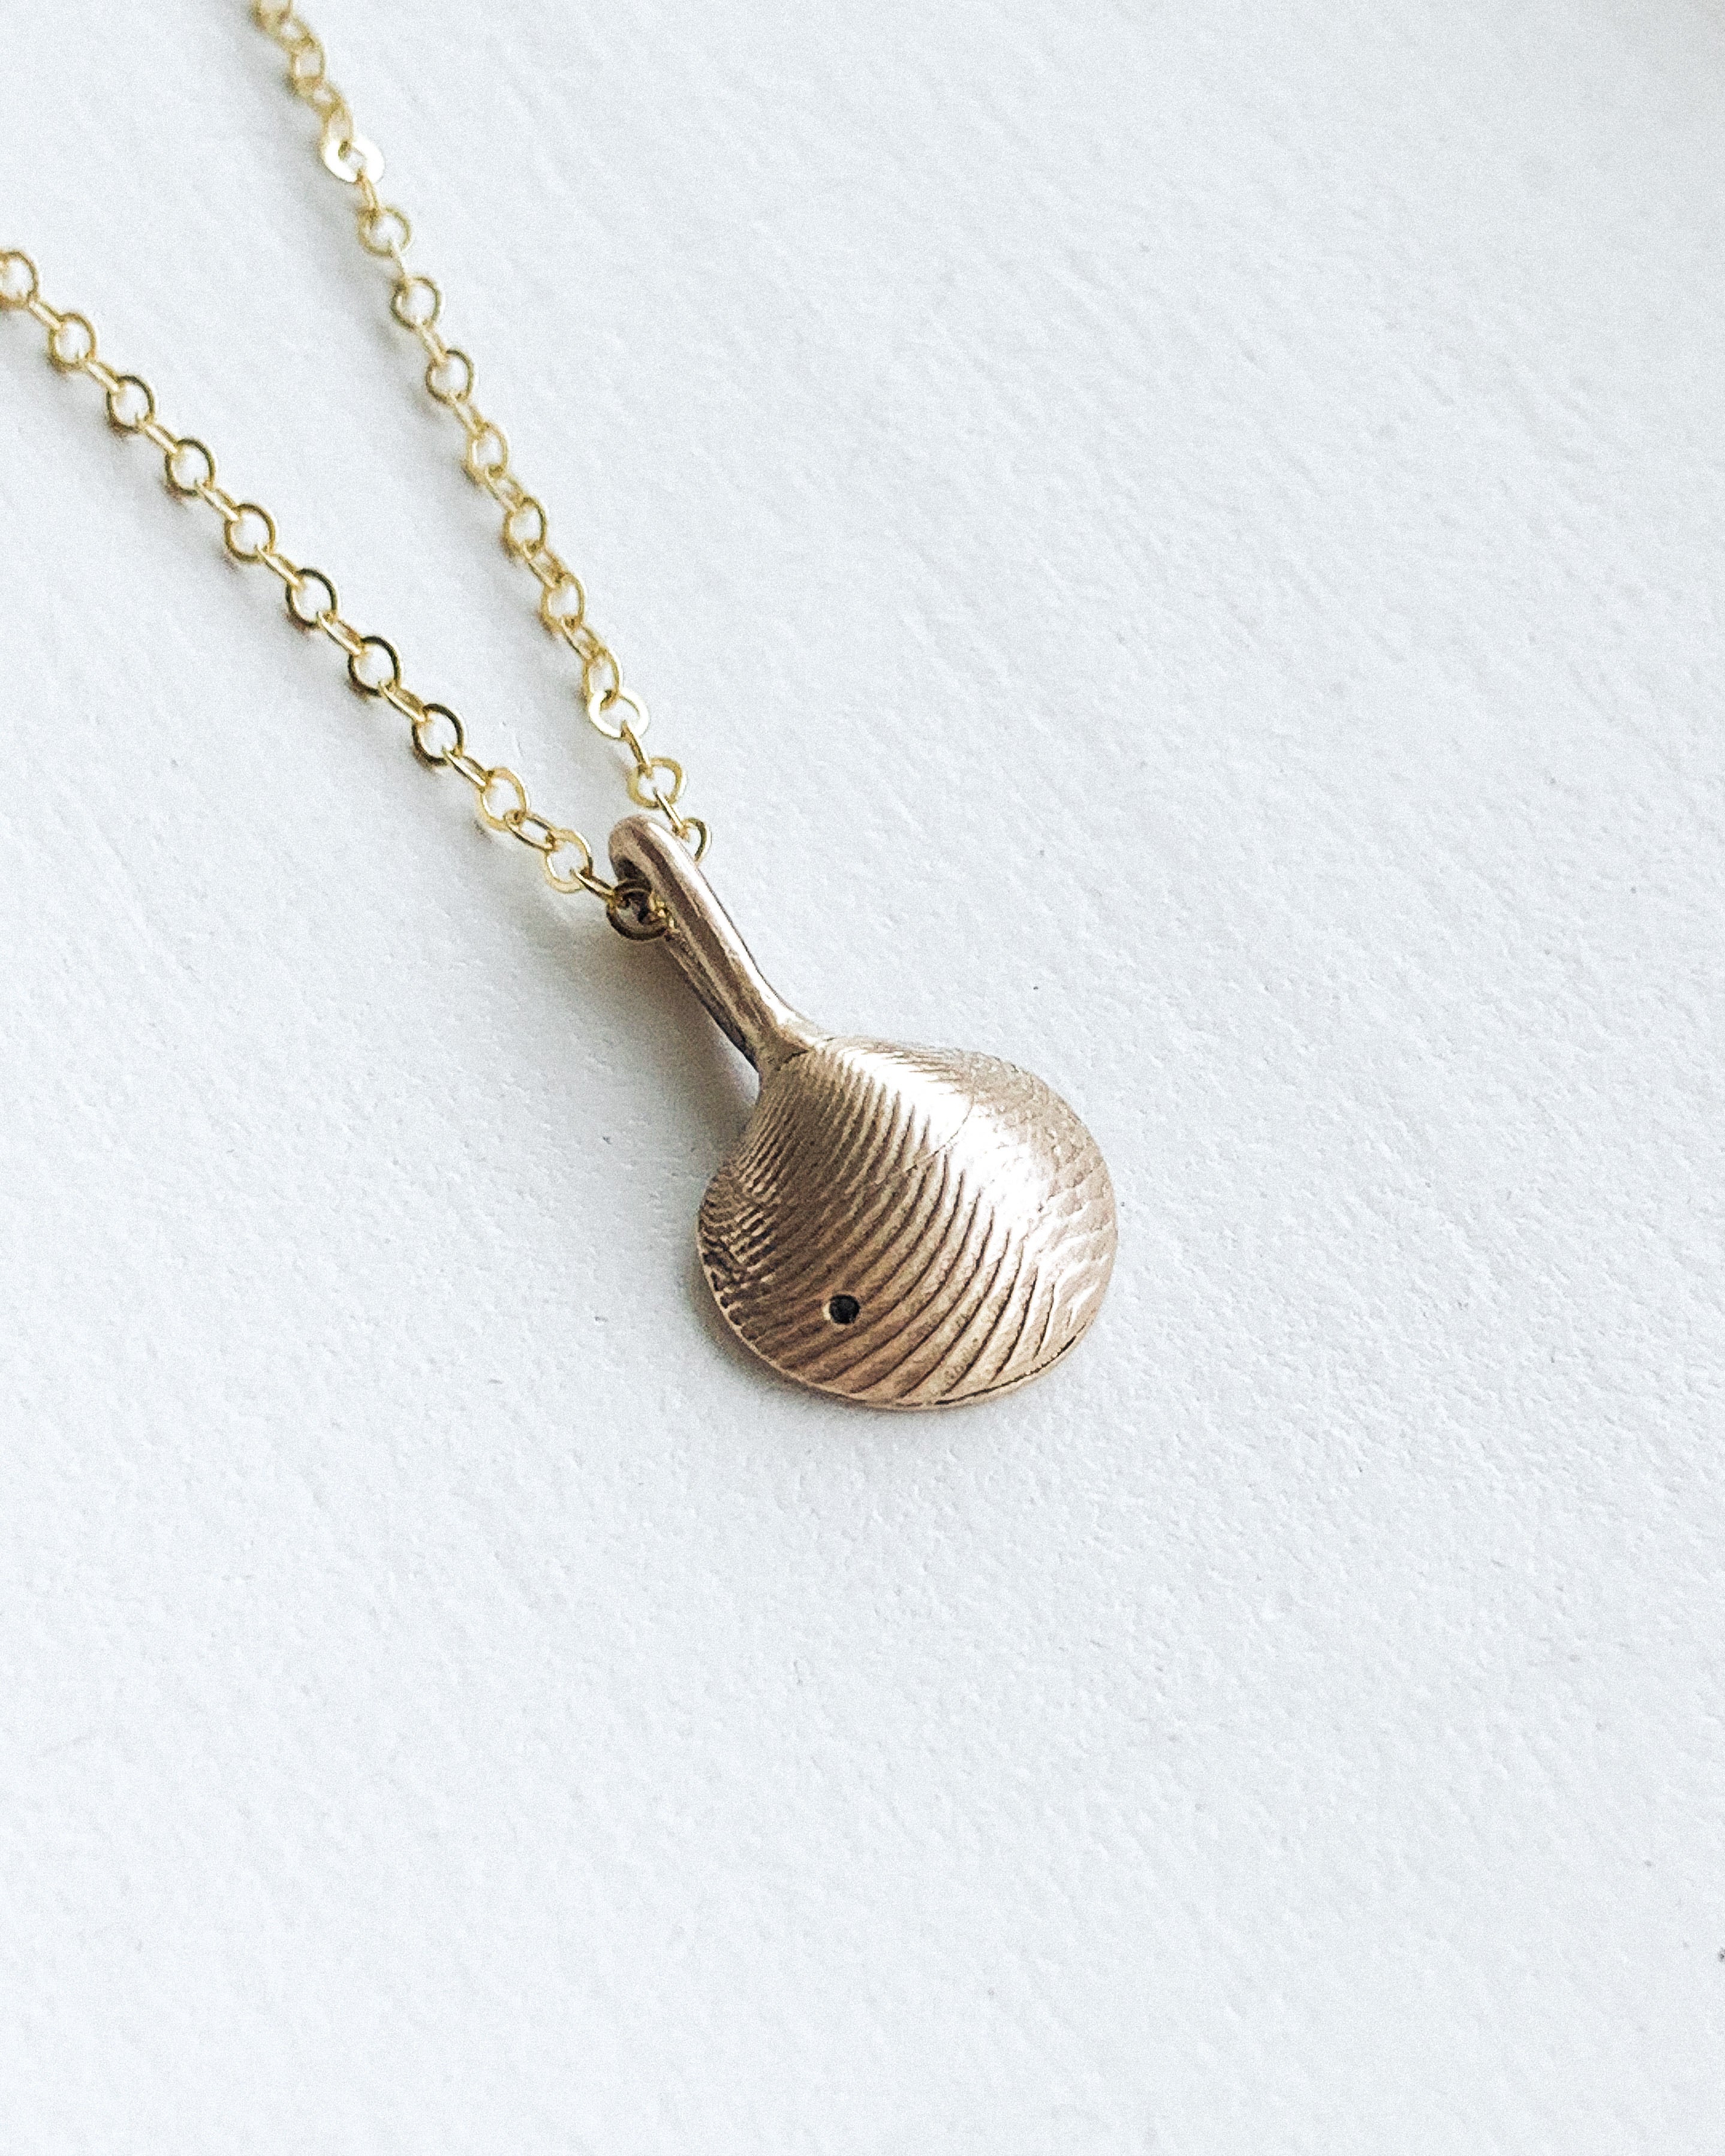 small bronze clamshell pendant with a bronze chain shown on a white background